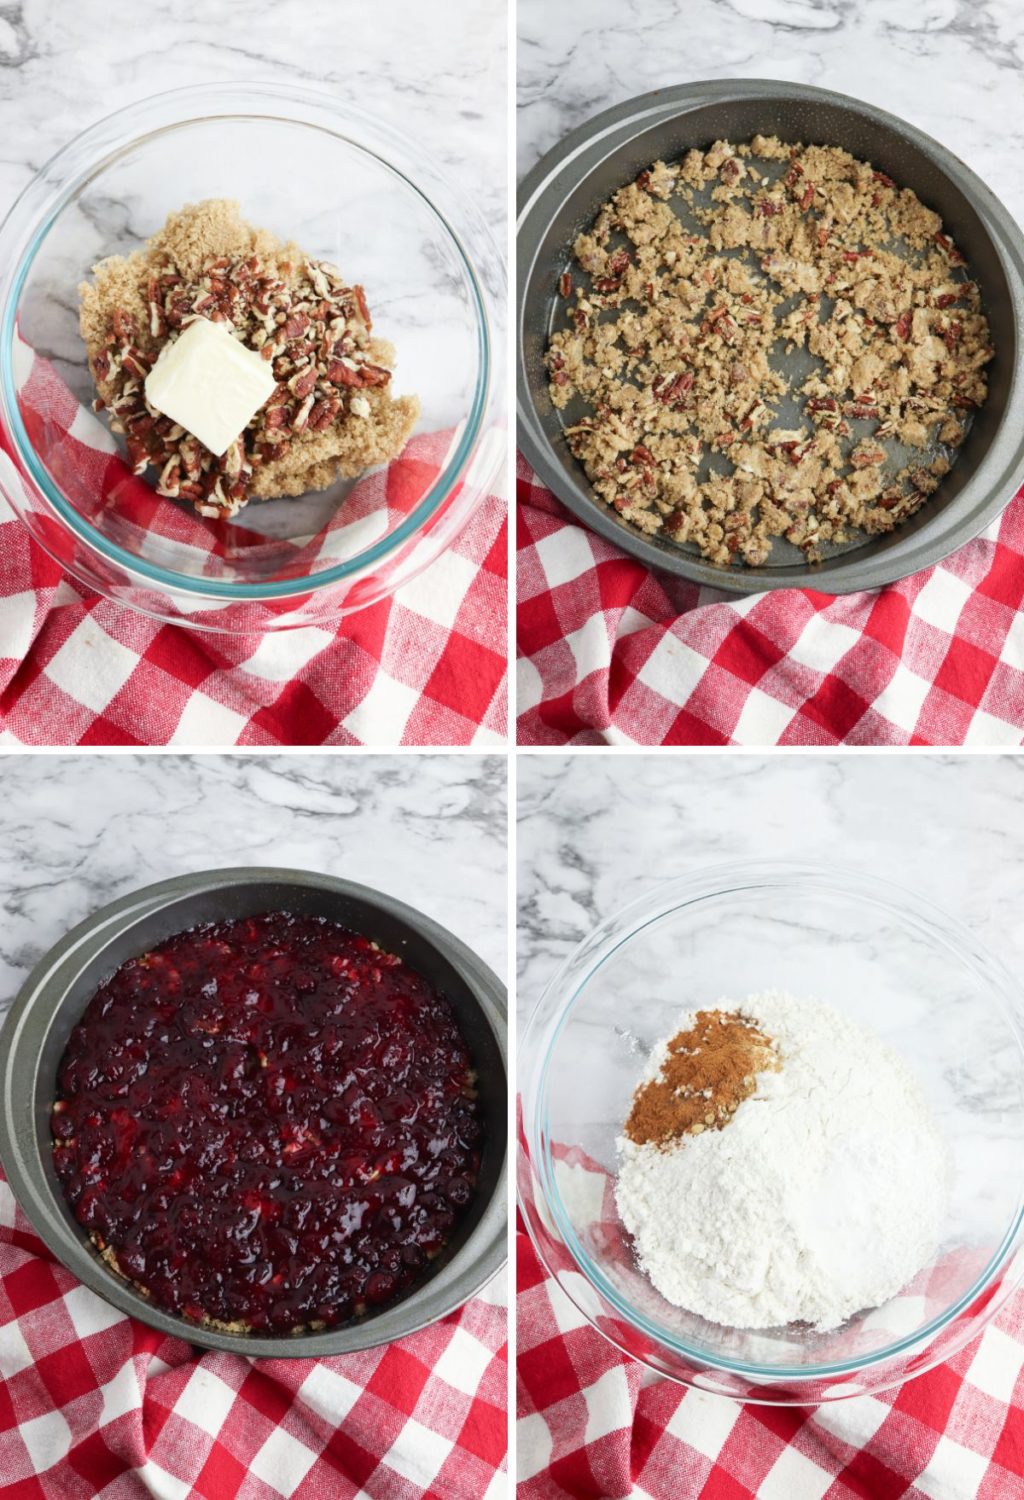 Four pictures showing the ingredients for cranberry pie.